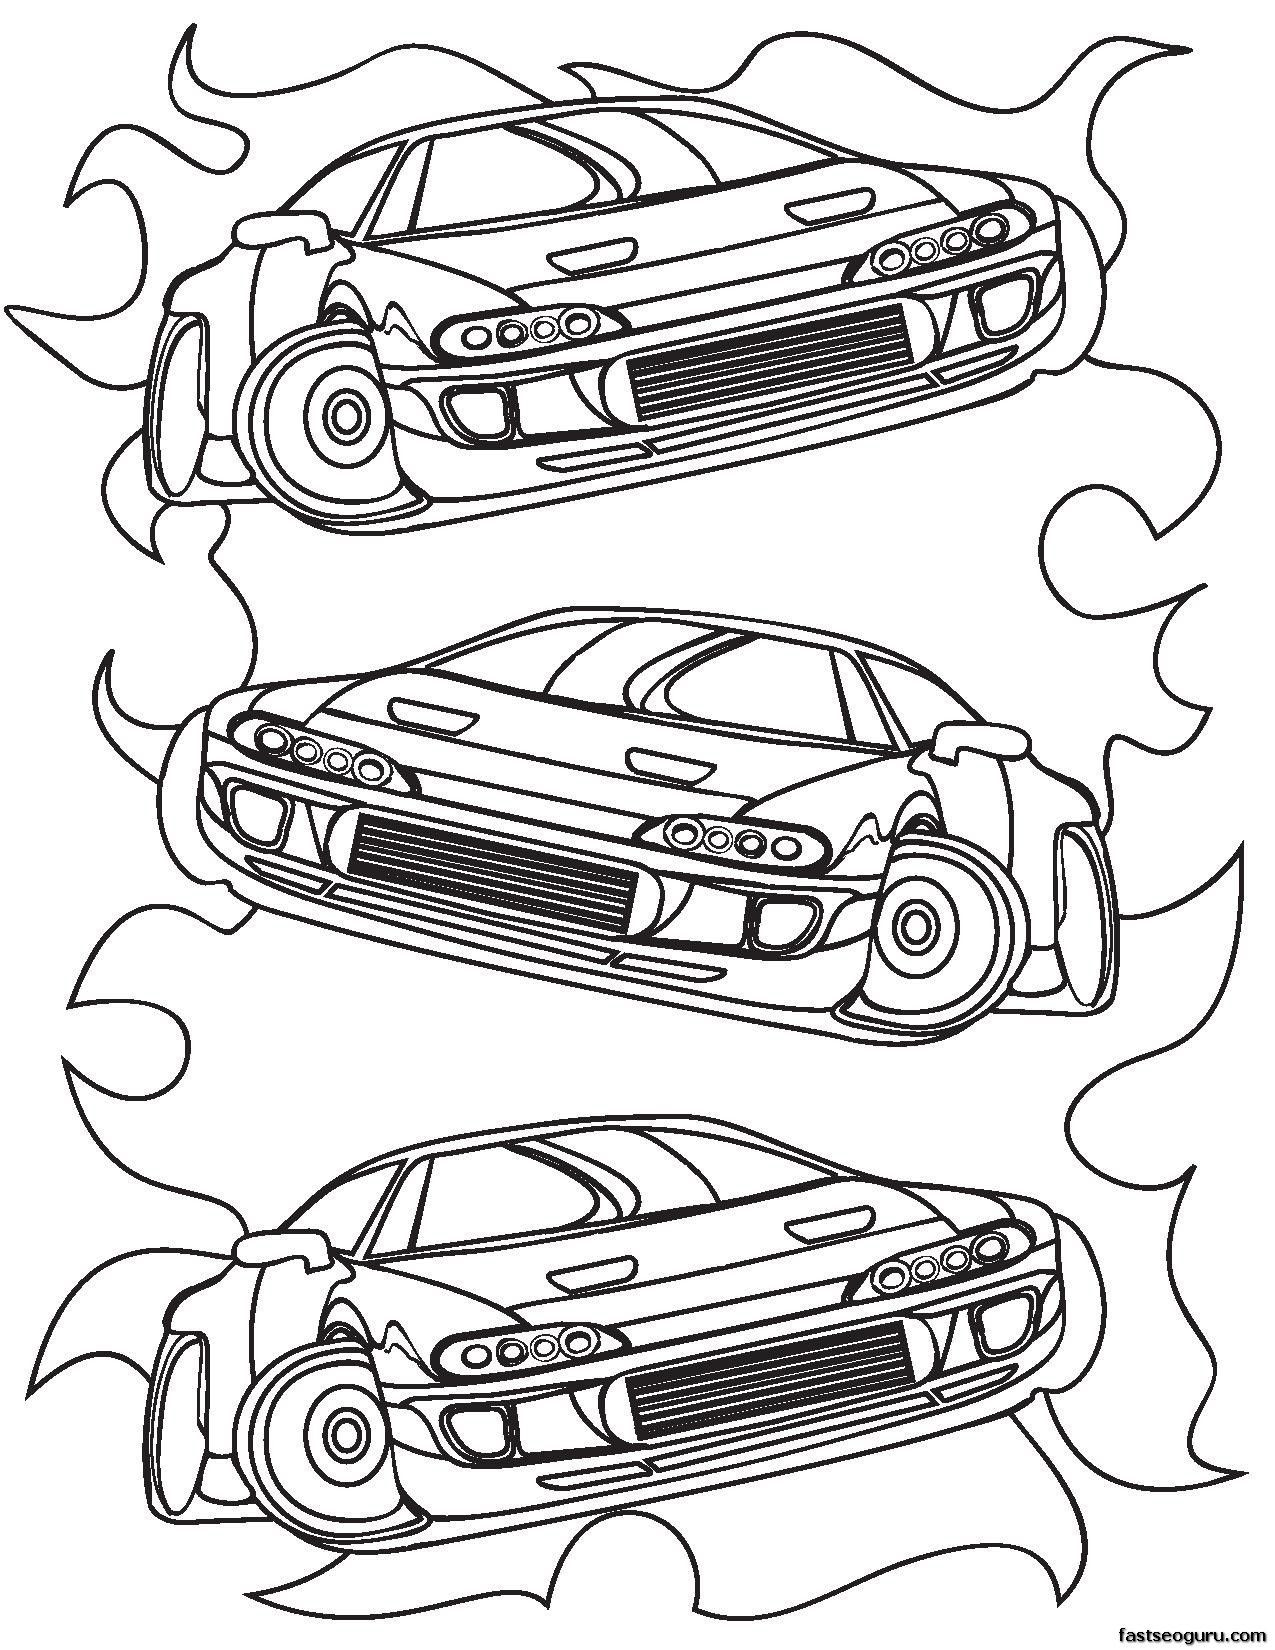 Cars Coloring Pages For Boys
 Pin by M E Currie on Car truck birthday party in 2019